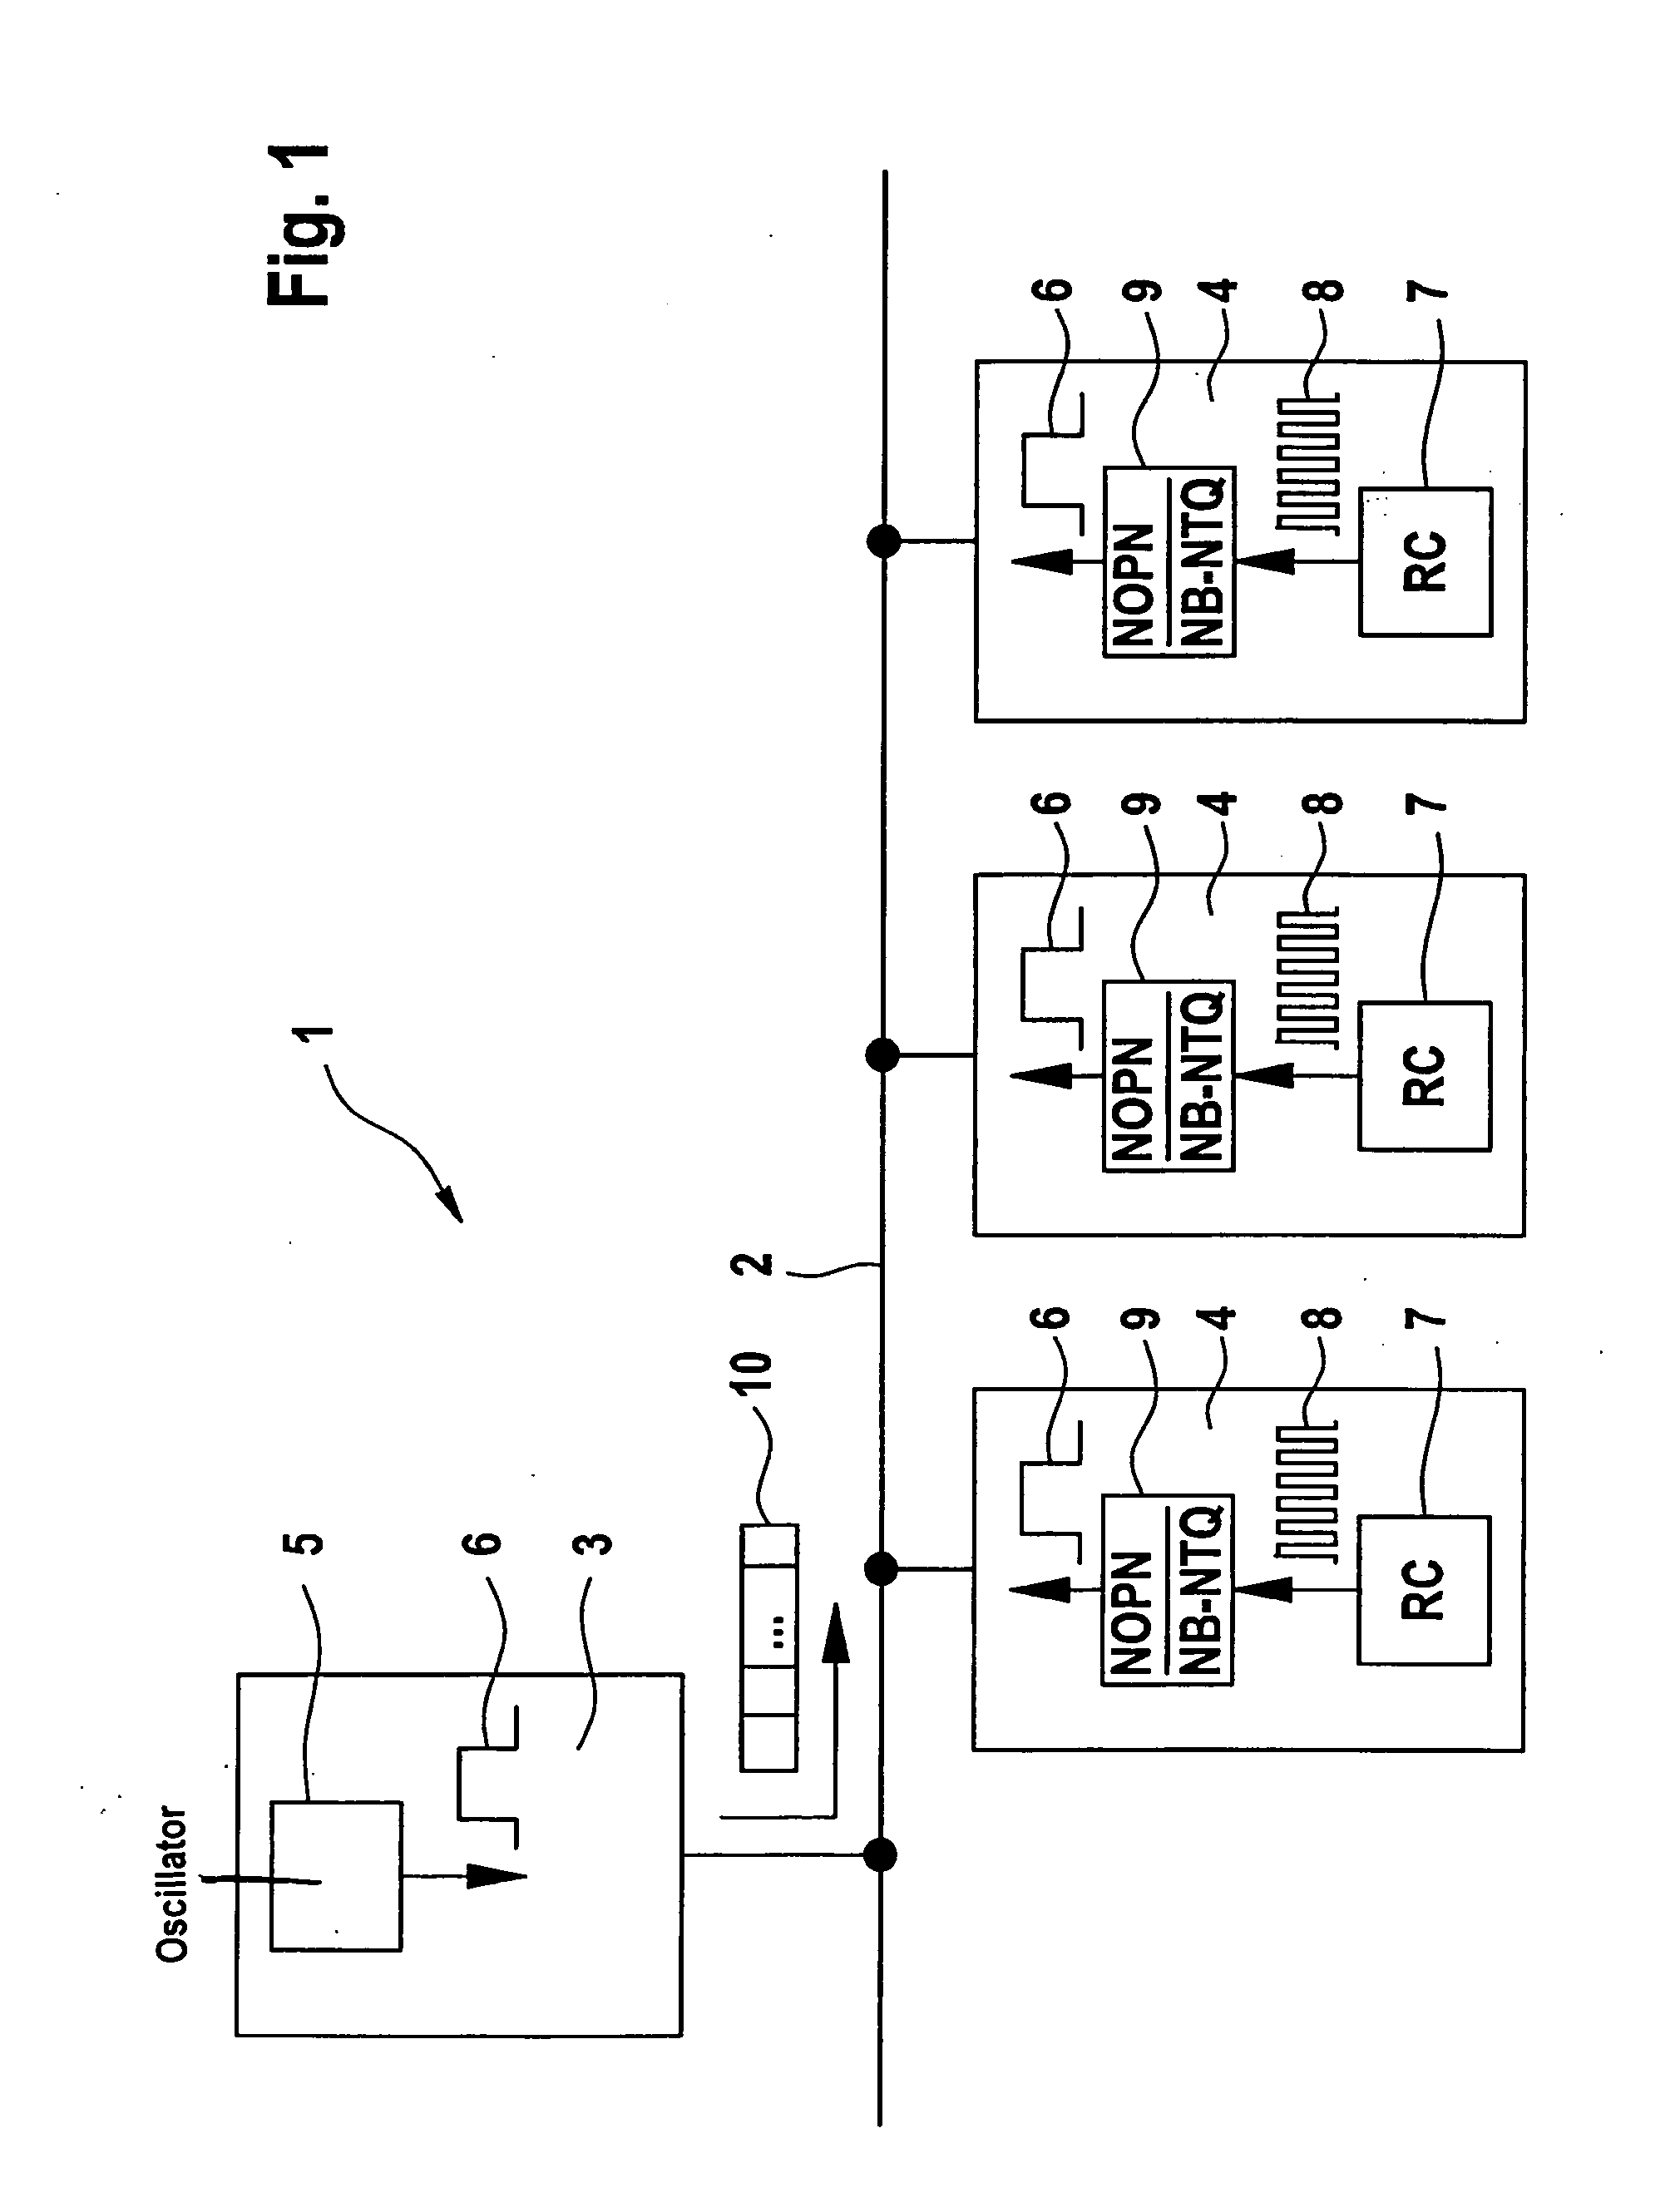 Communication system including a data bus and multiple user nodes connected thereto, and method for operating such a communication system